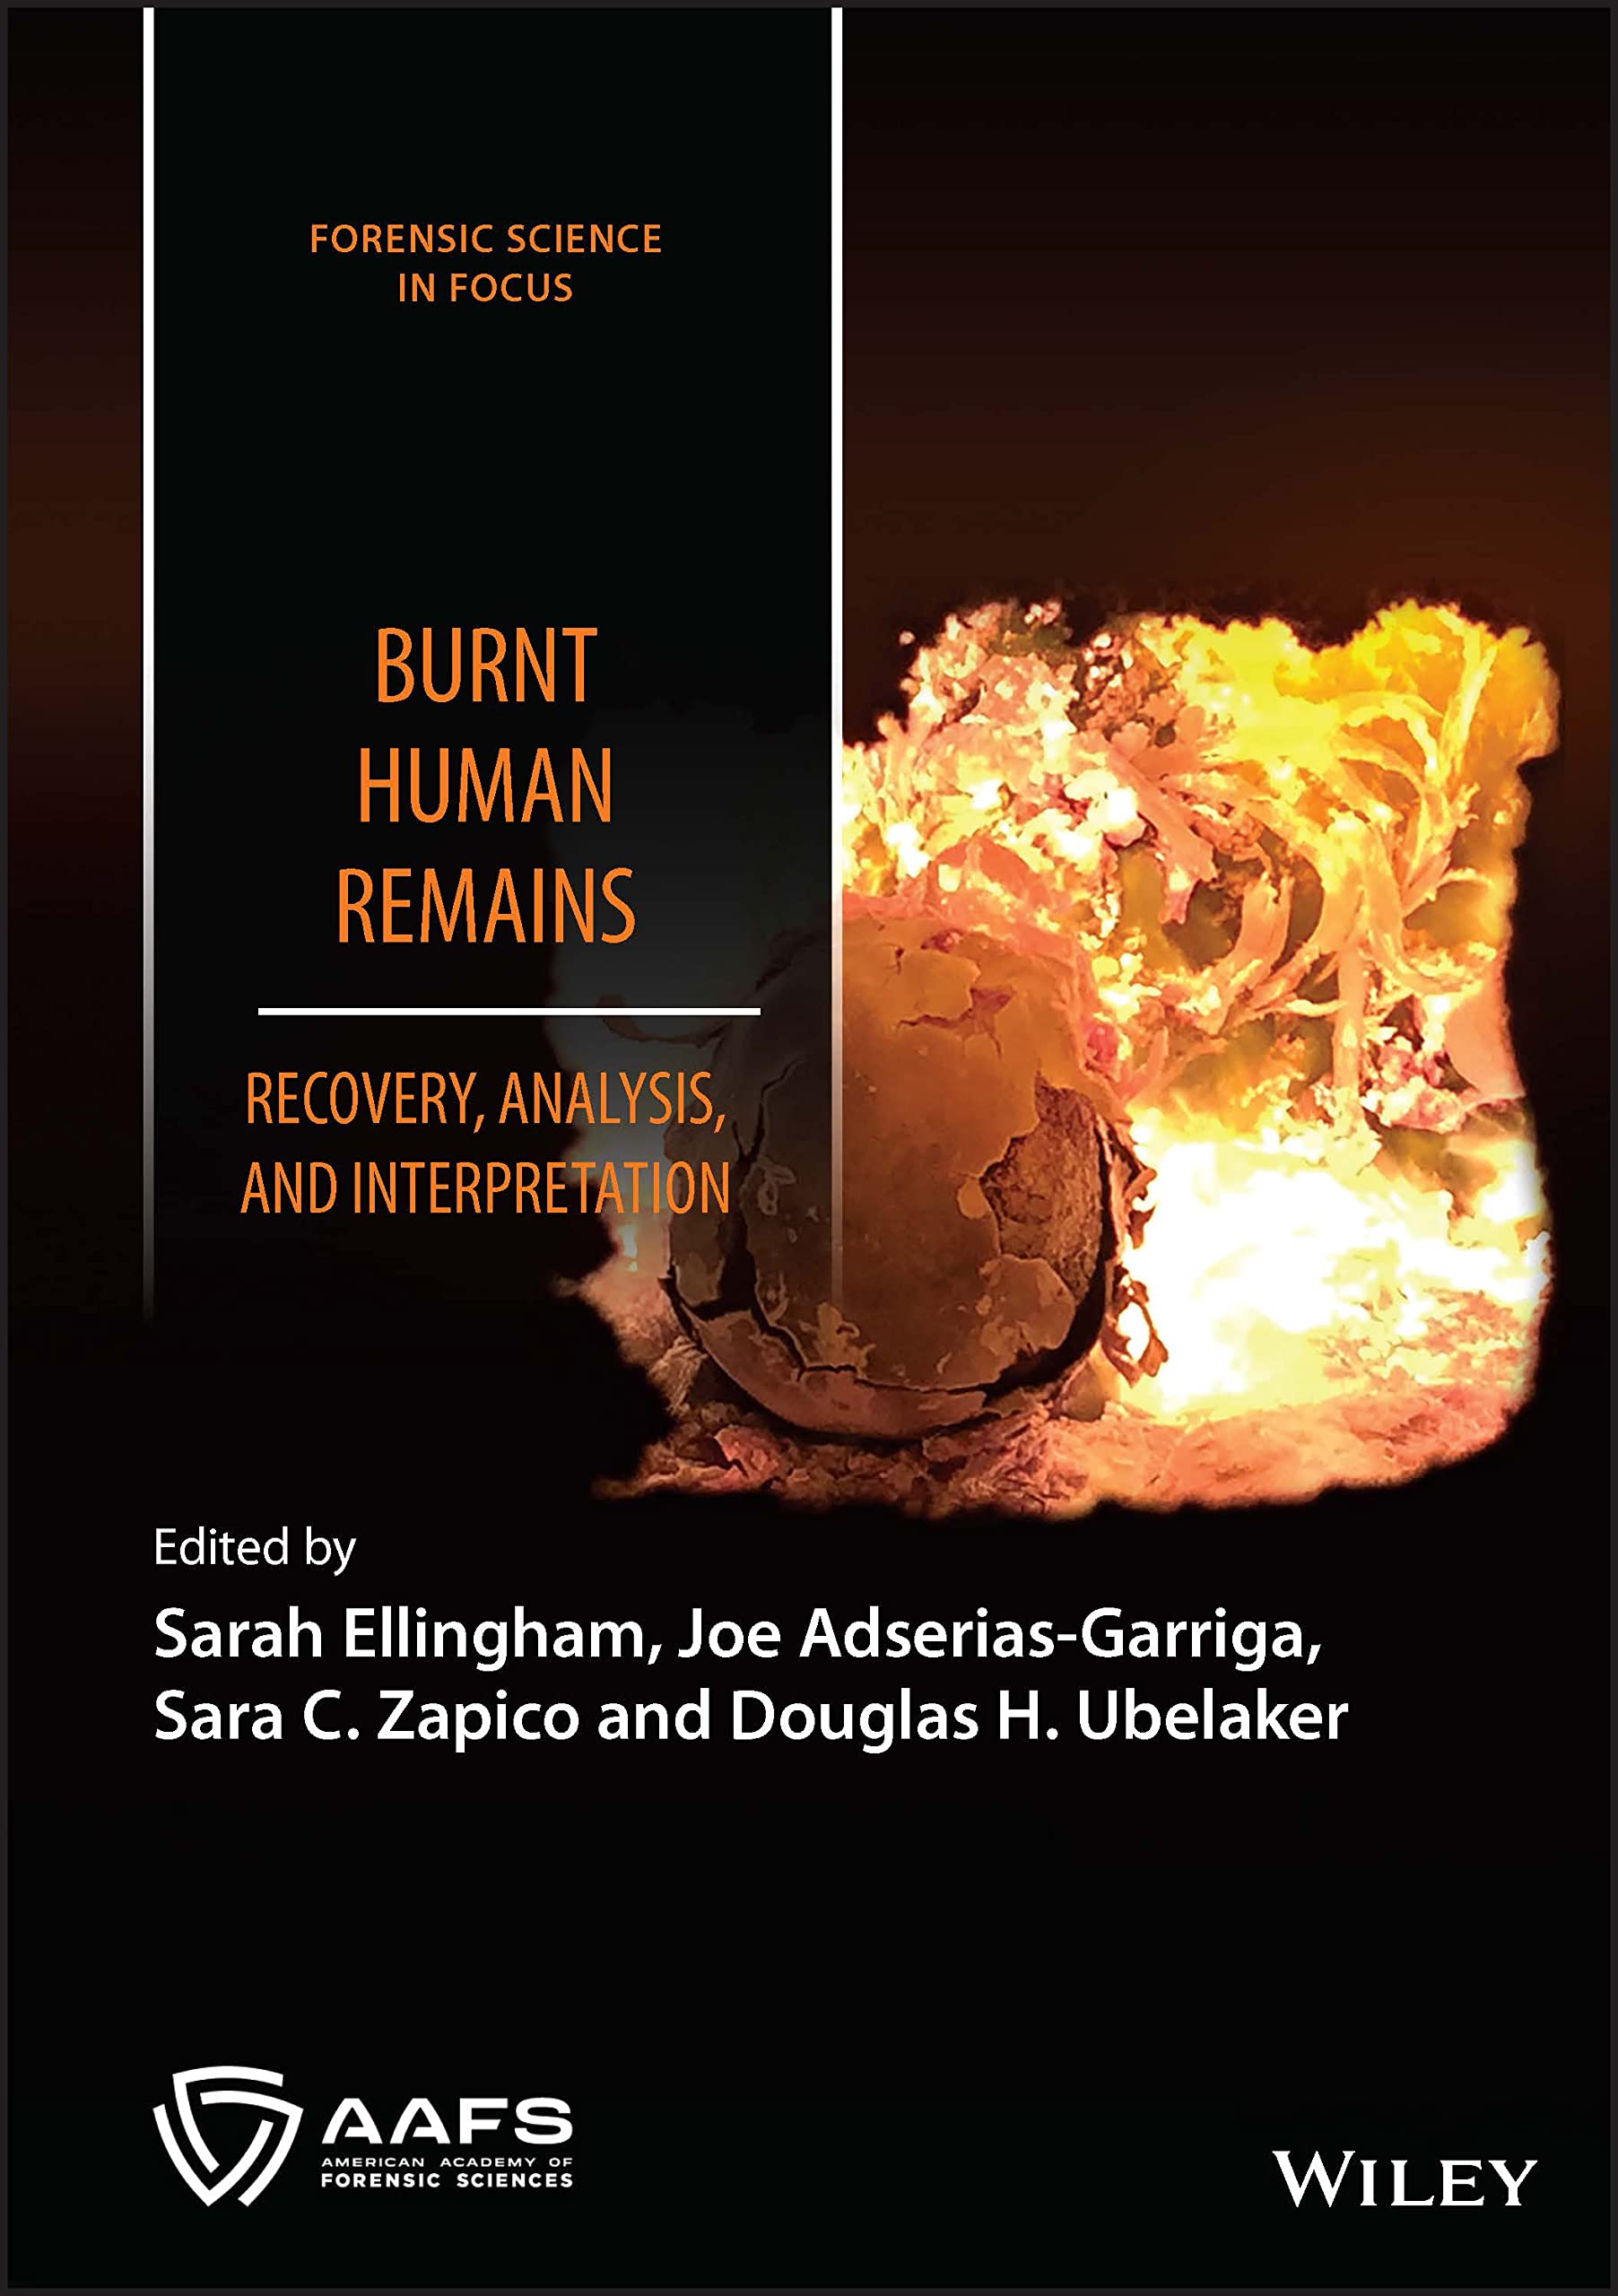 Burnt Human Remains: Recovery, Analysis, and Interpretation (Forensic Science in Focus)  by Sarah Ellingham